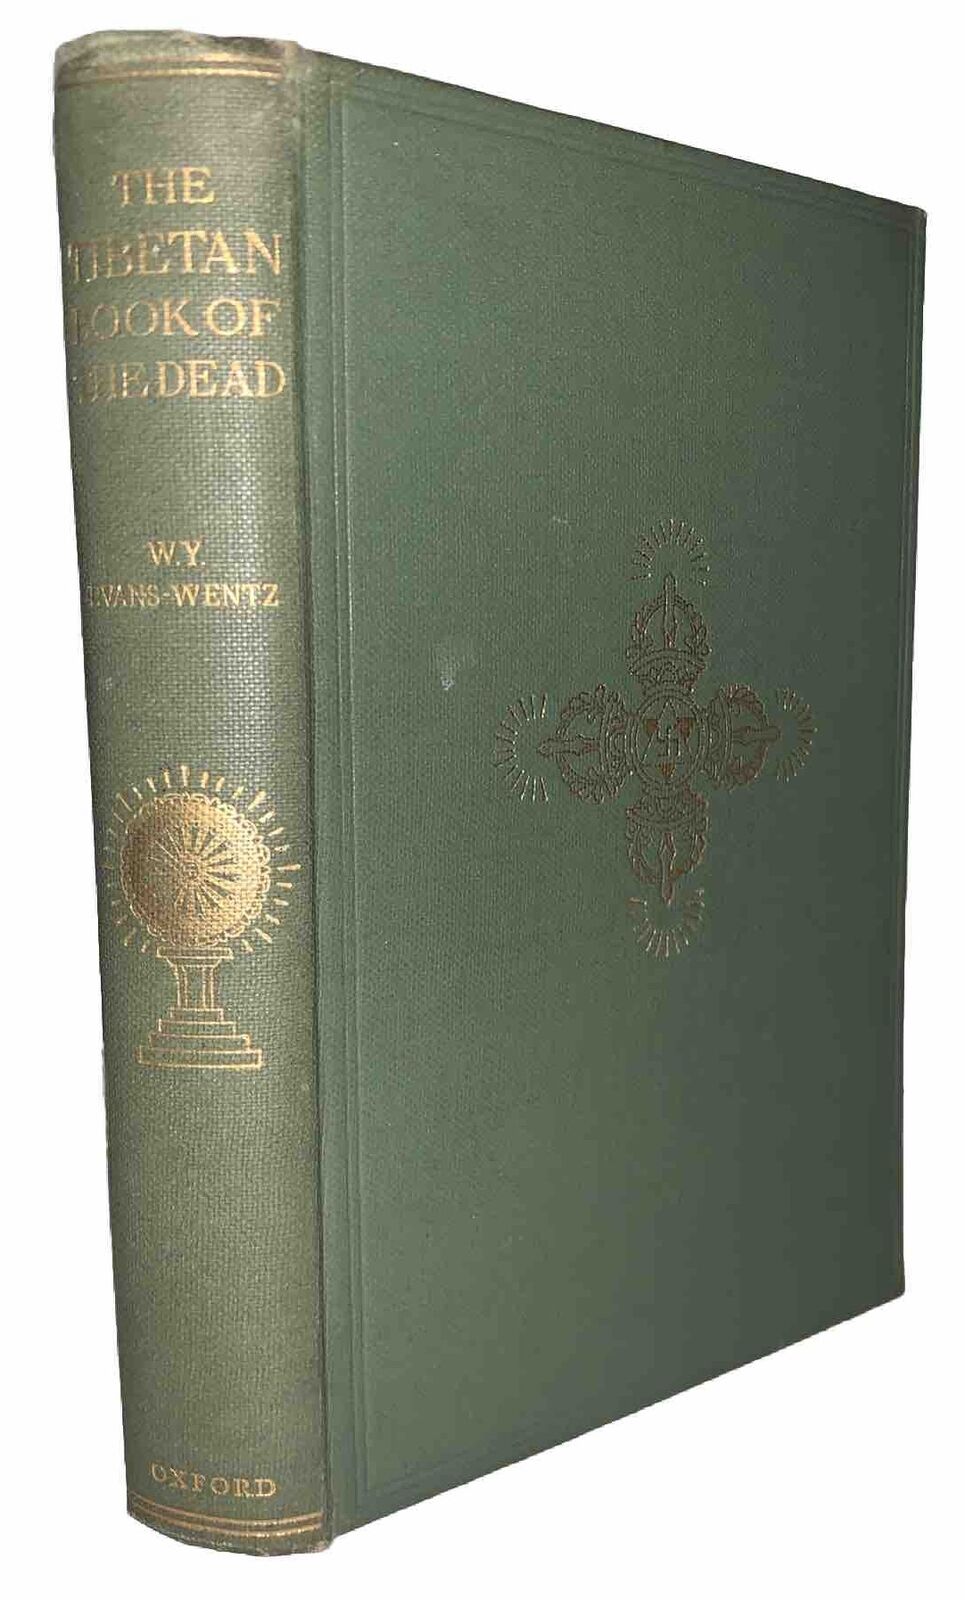 THE TIBETAN BOOK OF THE DEAD, by W. Y. EVANS-WENTZ, 1936, 1st Ed, 2nd, BUDDHISM